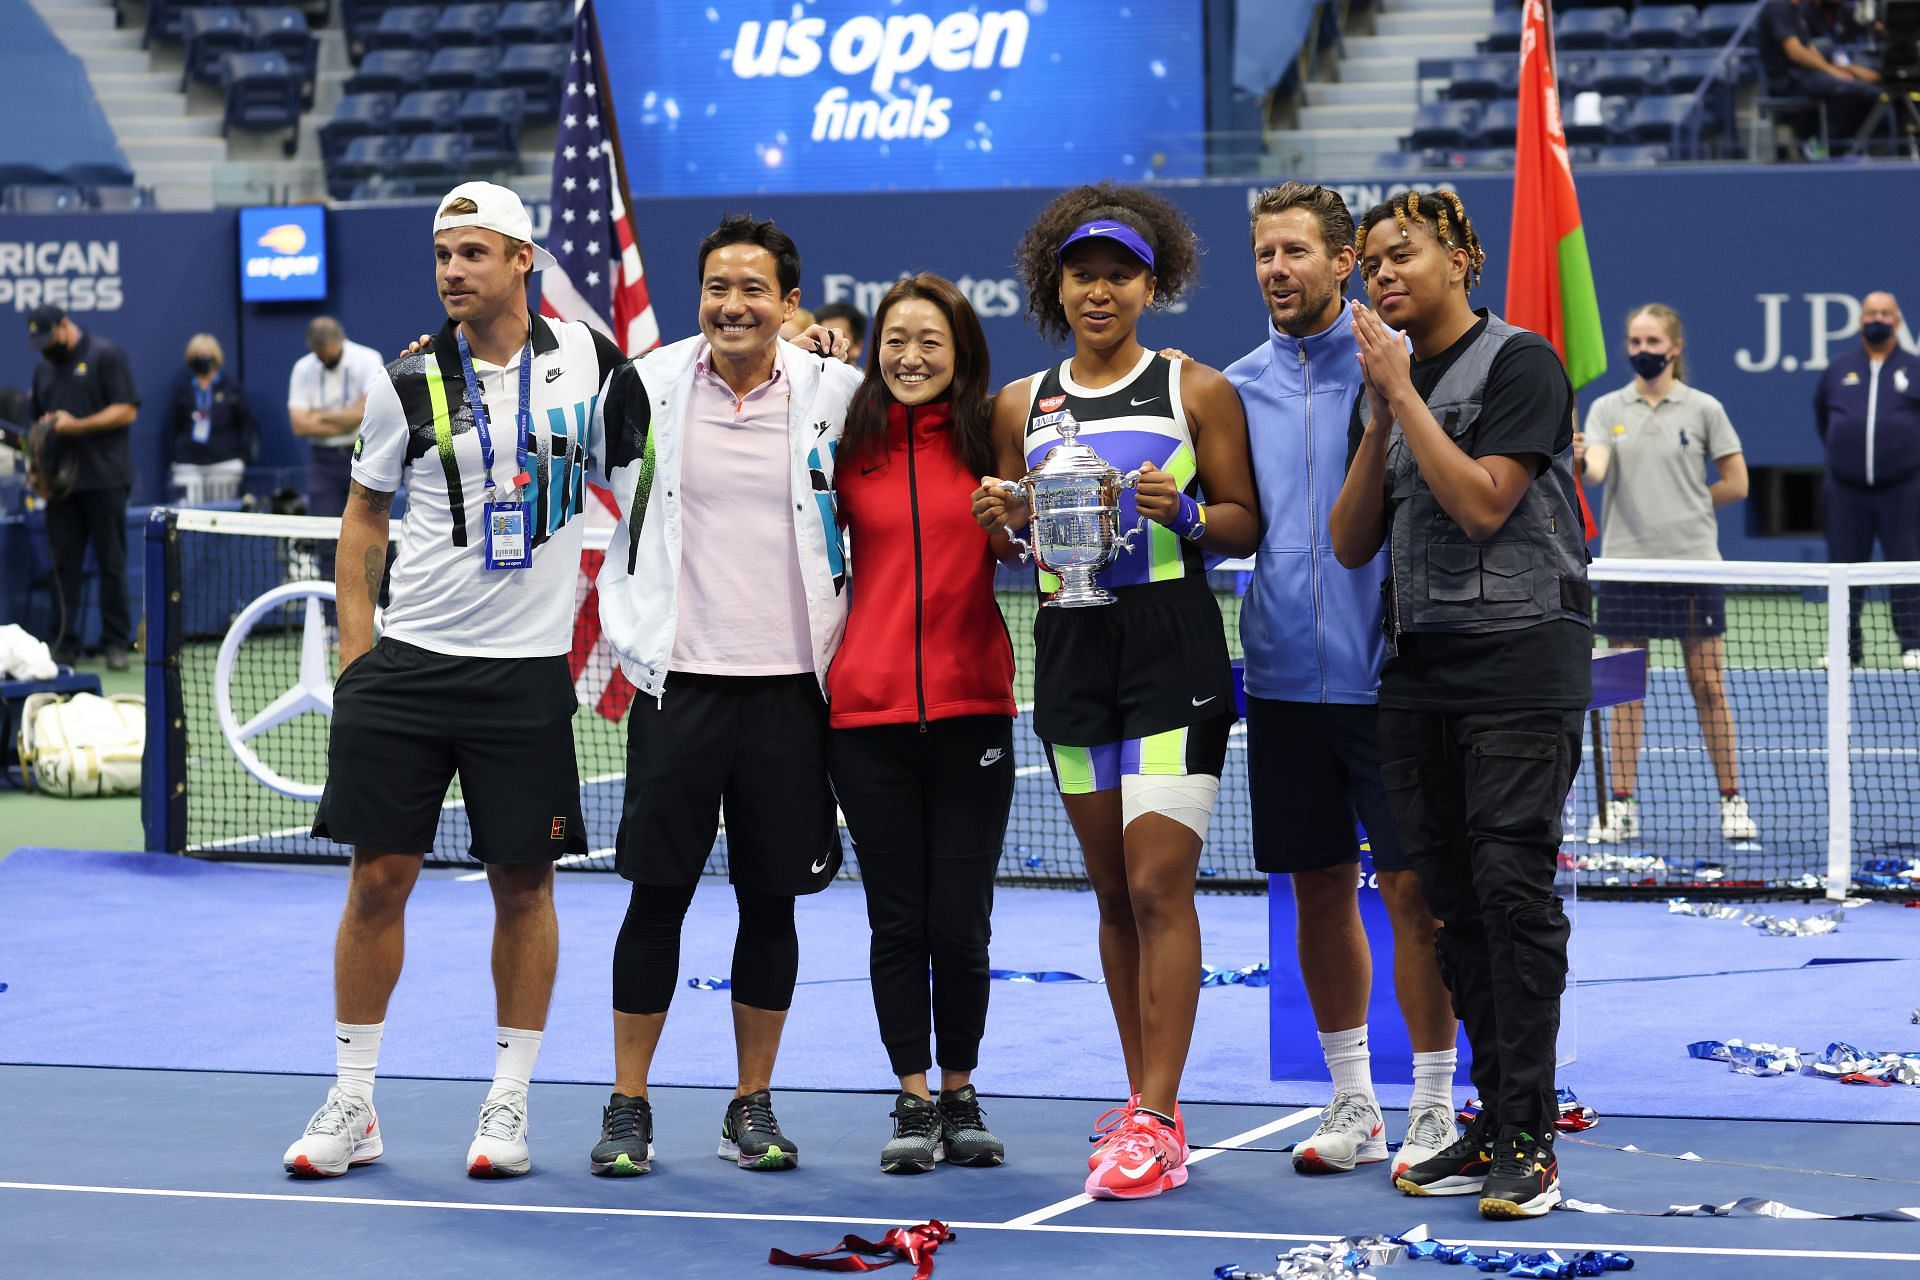 Naomi Osaka with Cordae and her team at the 2020 US Open.